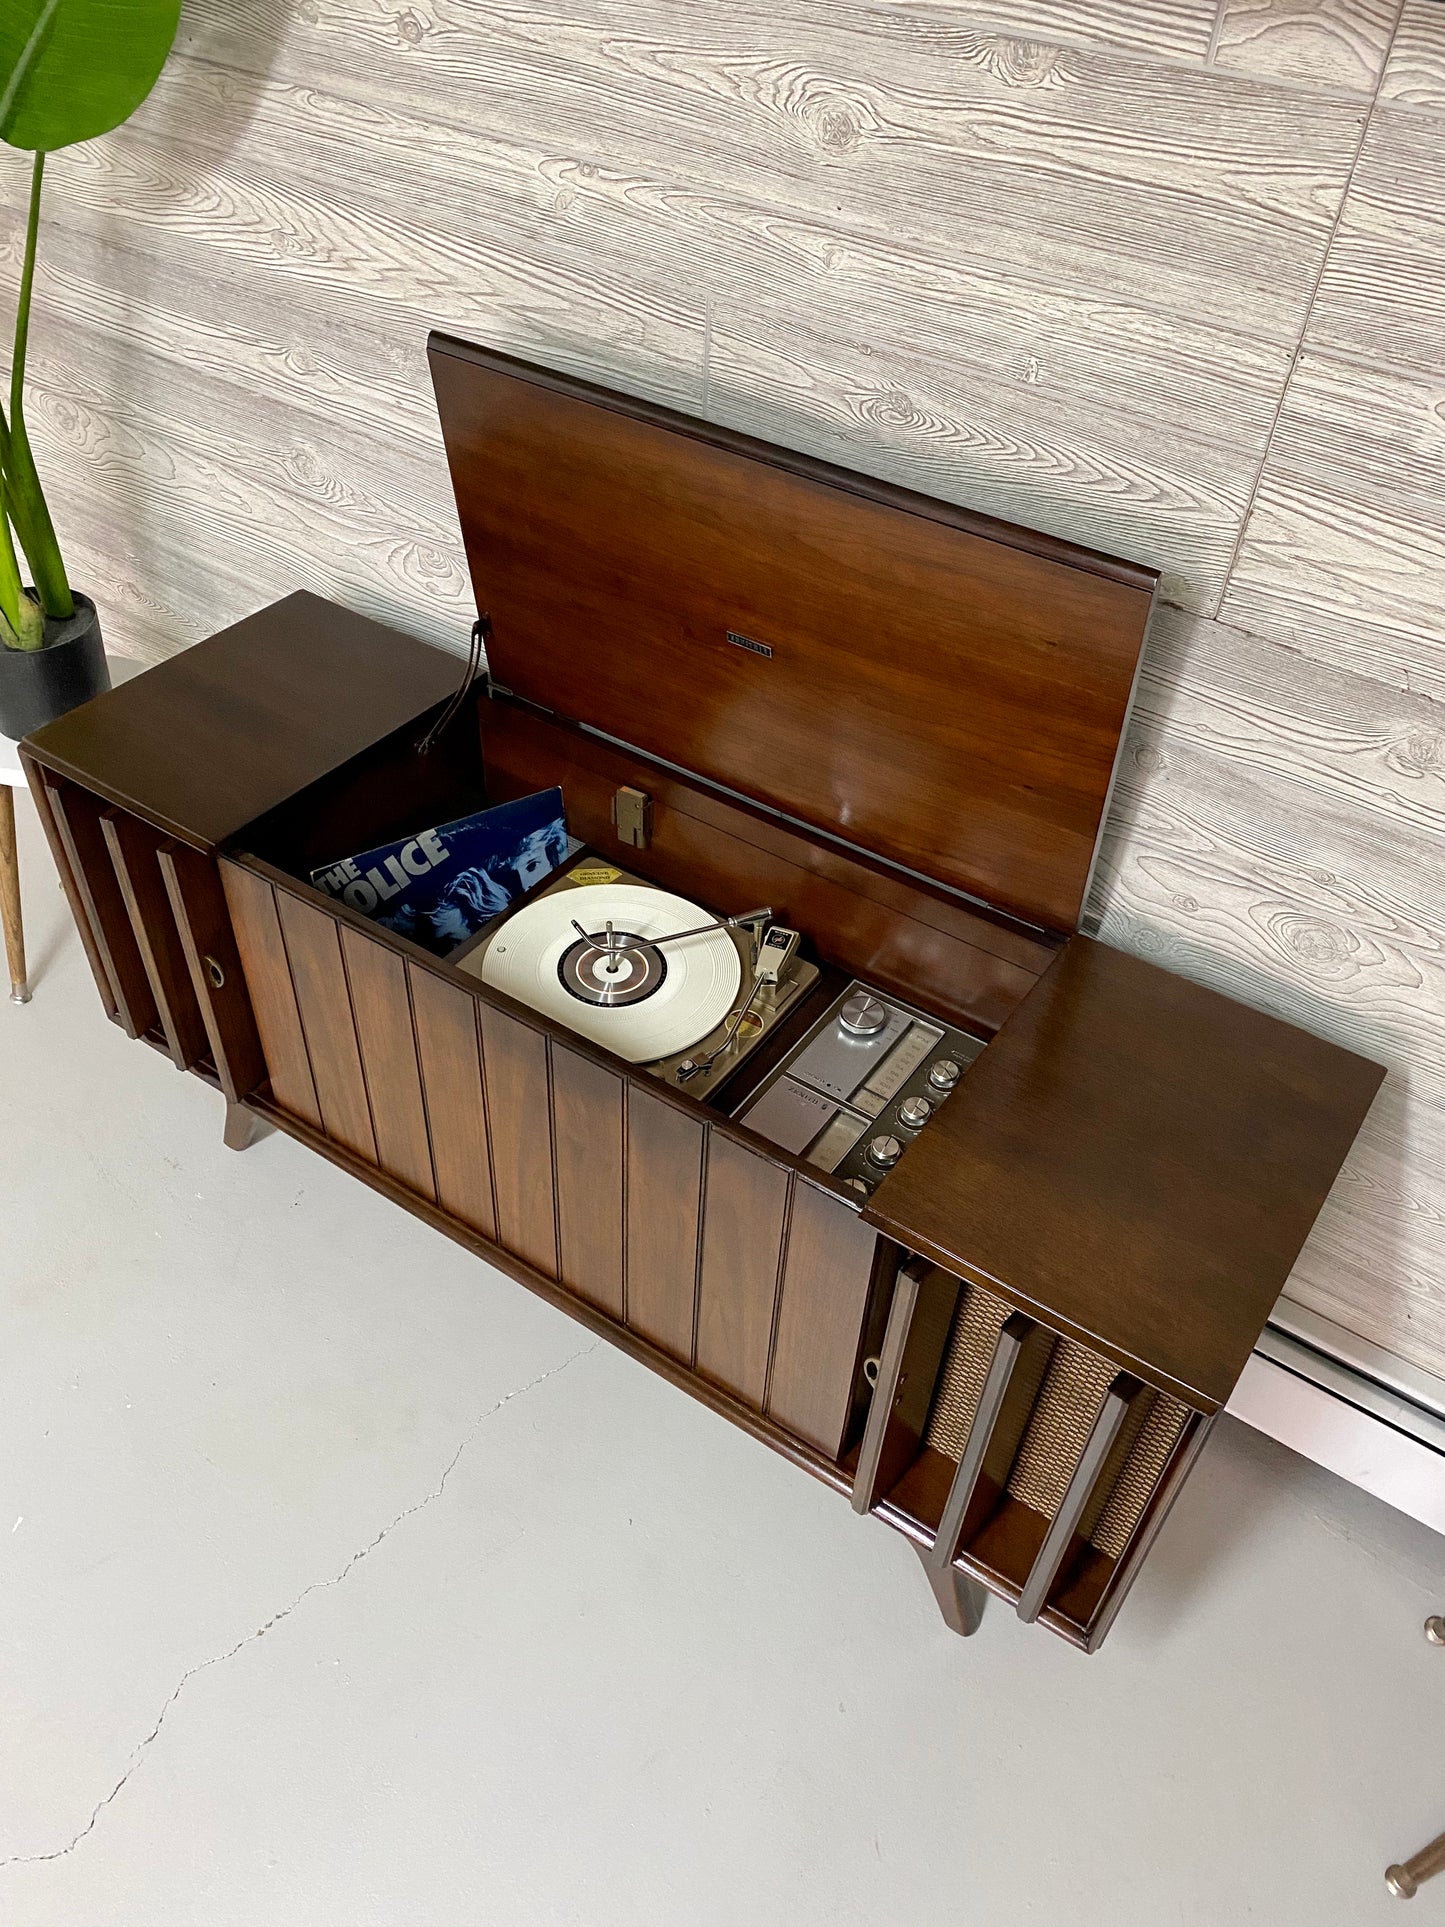 **SOLD OUT** ZENITH Louver Door 60s Record Player Changer Stereo Console AM FM Bluetooth Alexa The Vintedge Co.